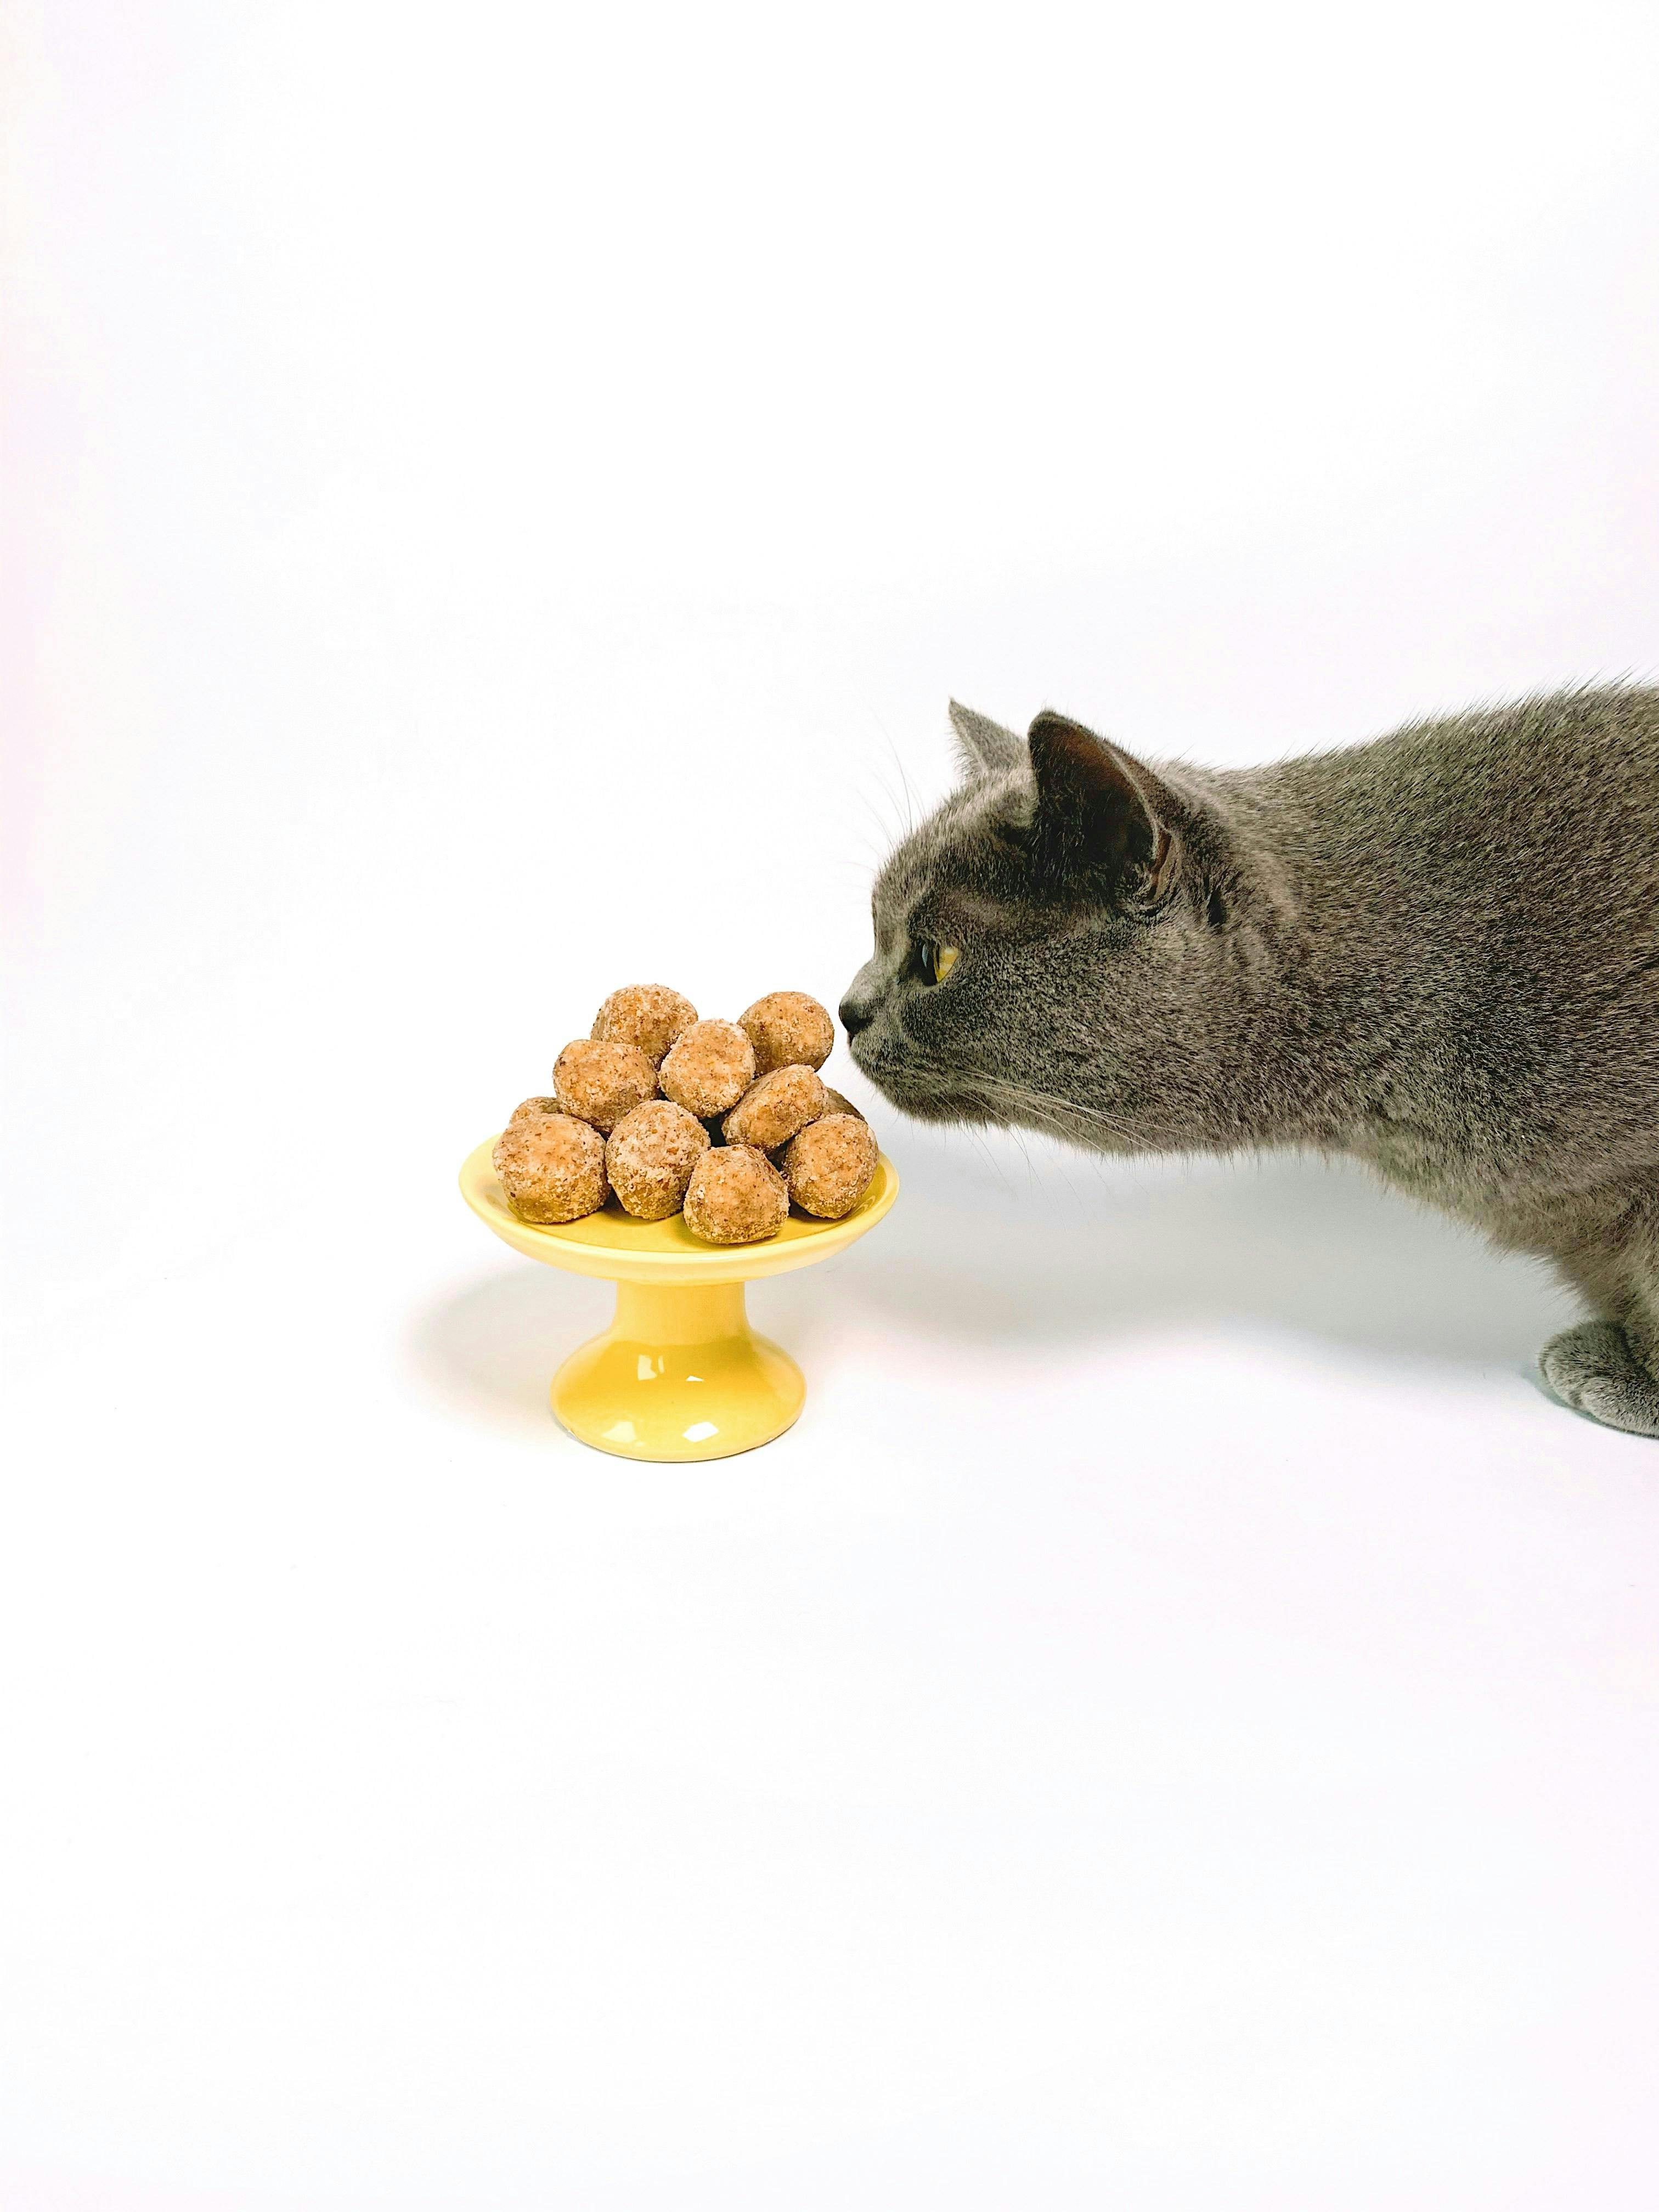 Why Won’t My Cat Eat Wet Food?